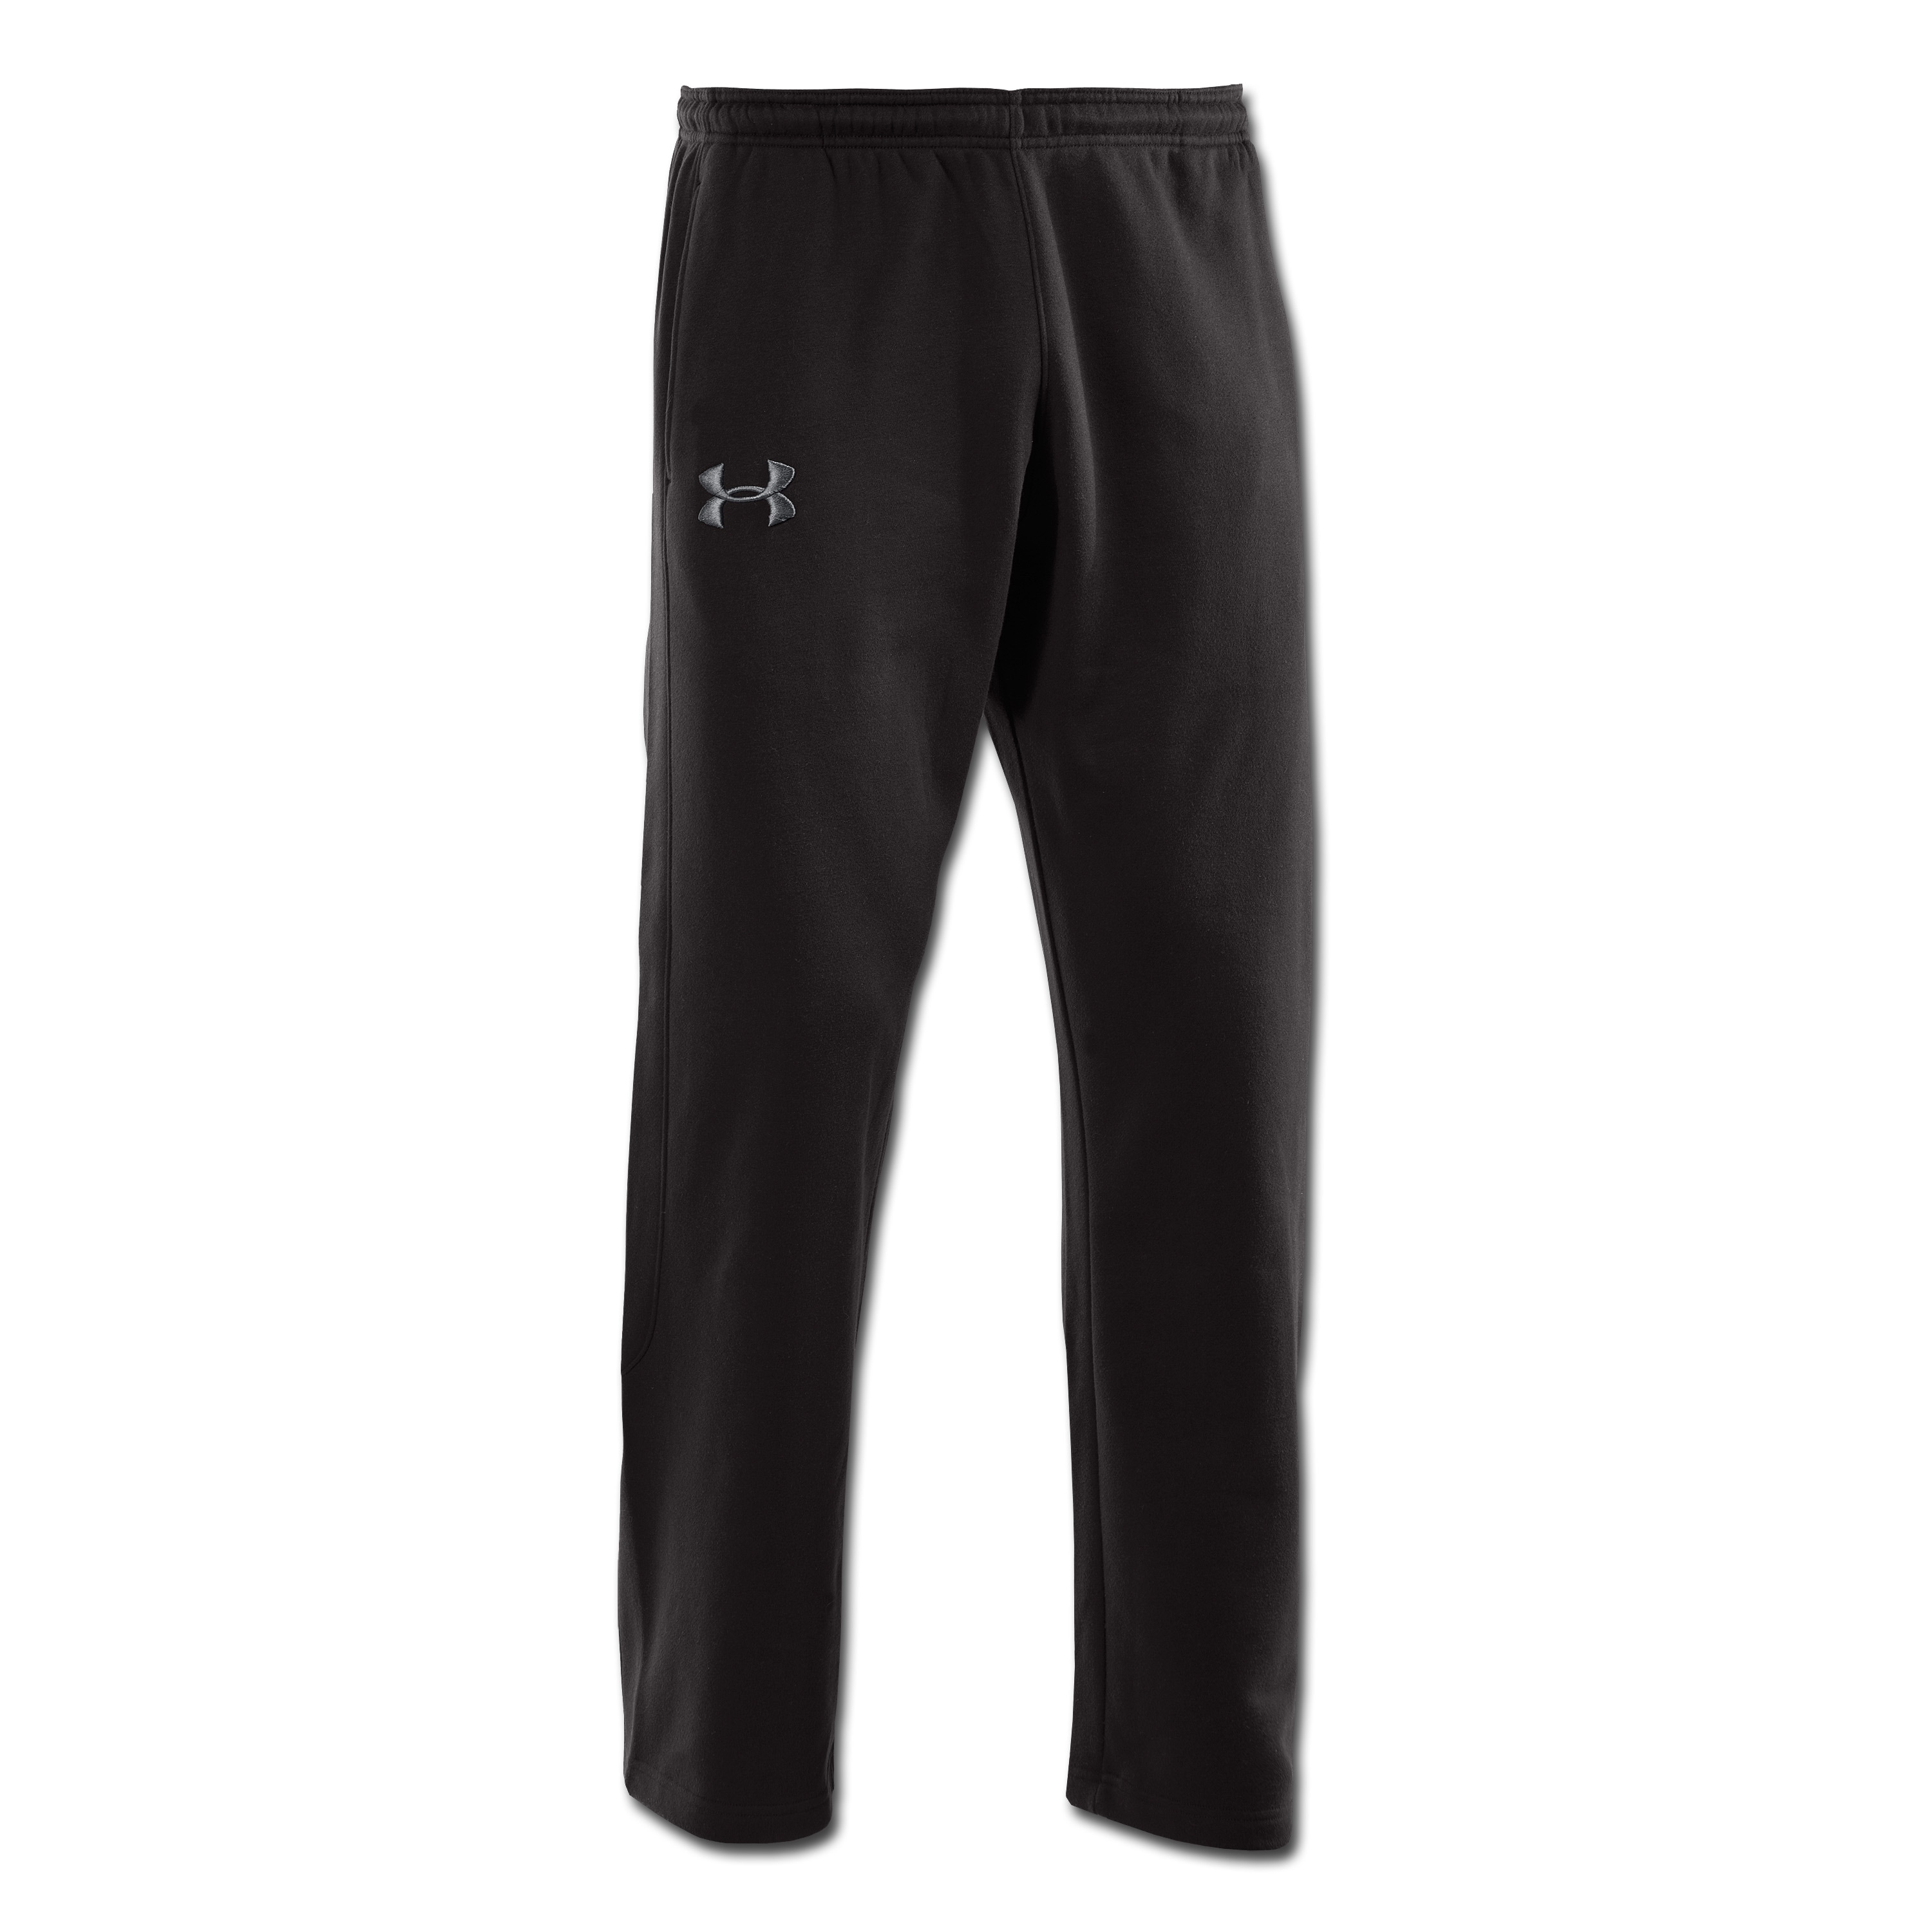 M's Under Armour ColdGear EVO Loose Fit Training Pants Small S Black ...